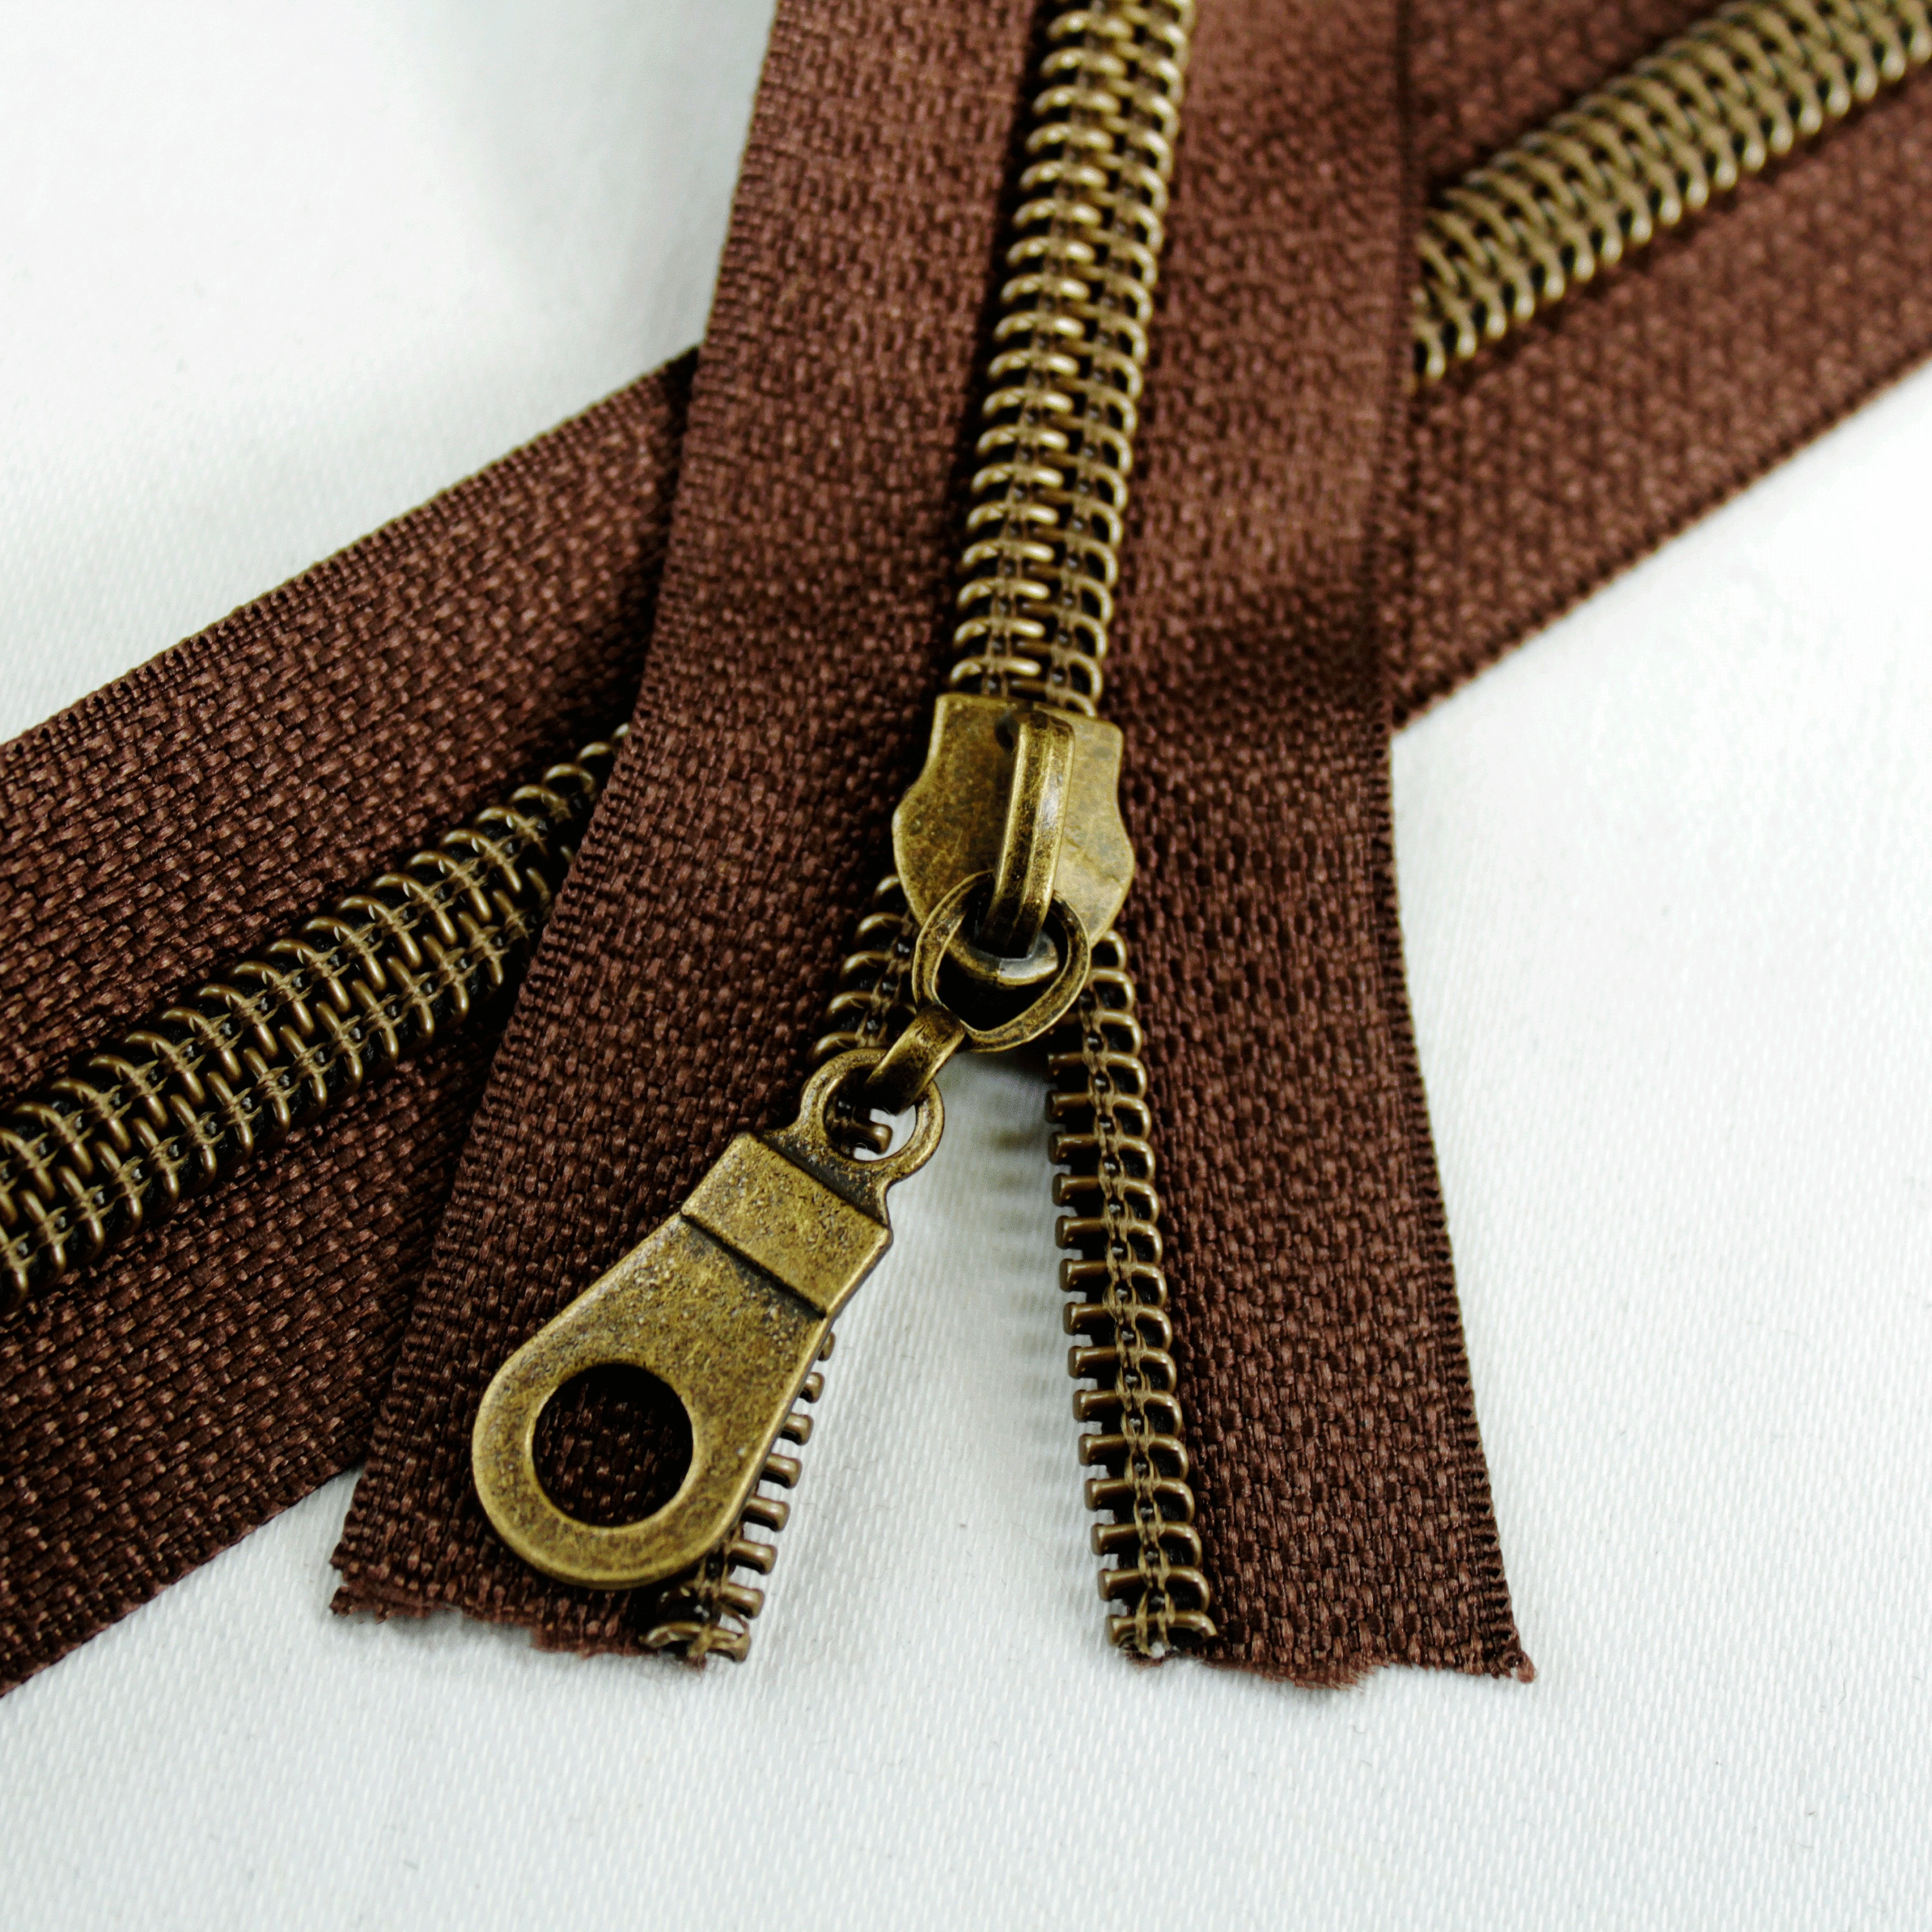 Size #5 Black Zipper by the Yard with Gold Coil - 5 yards & 15 Regular  (Donut) Zipper Pulls